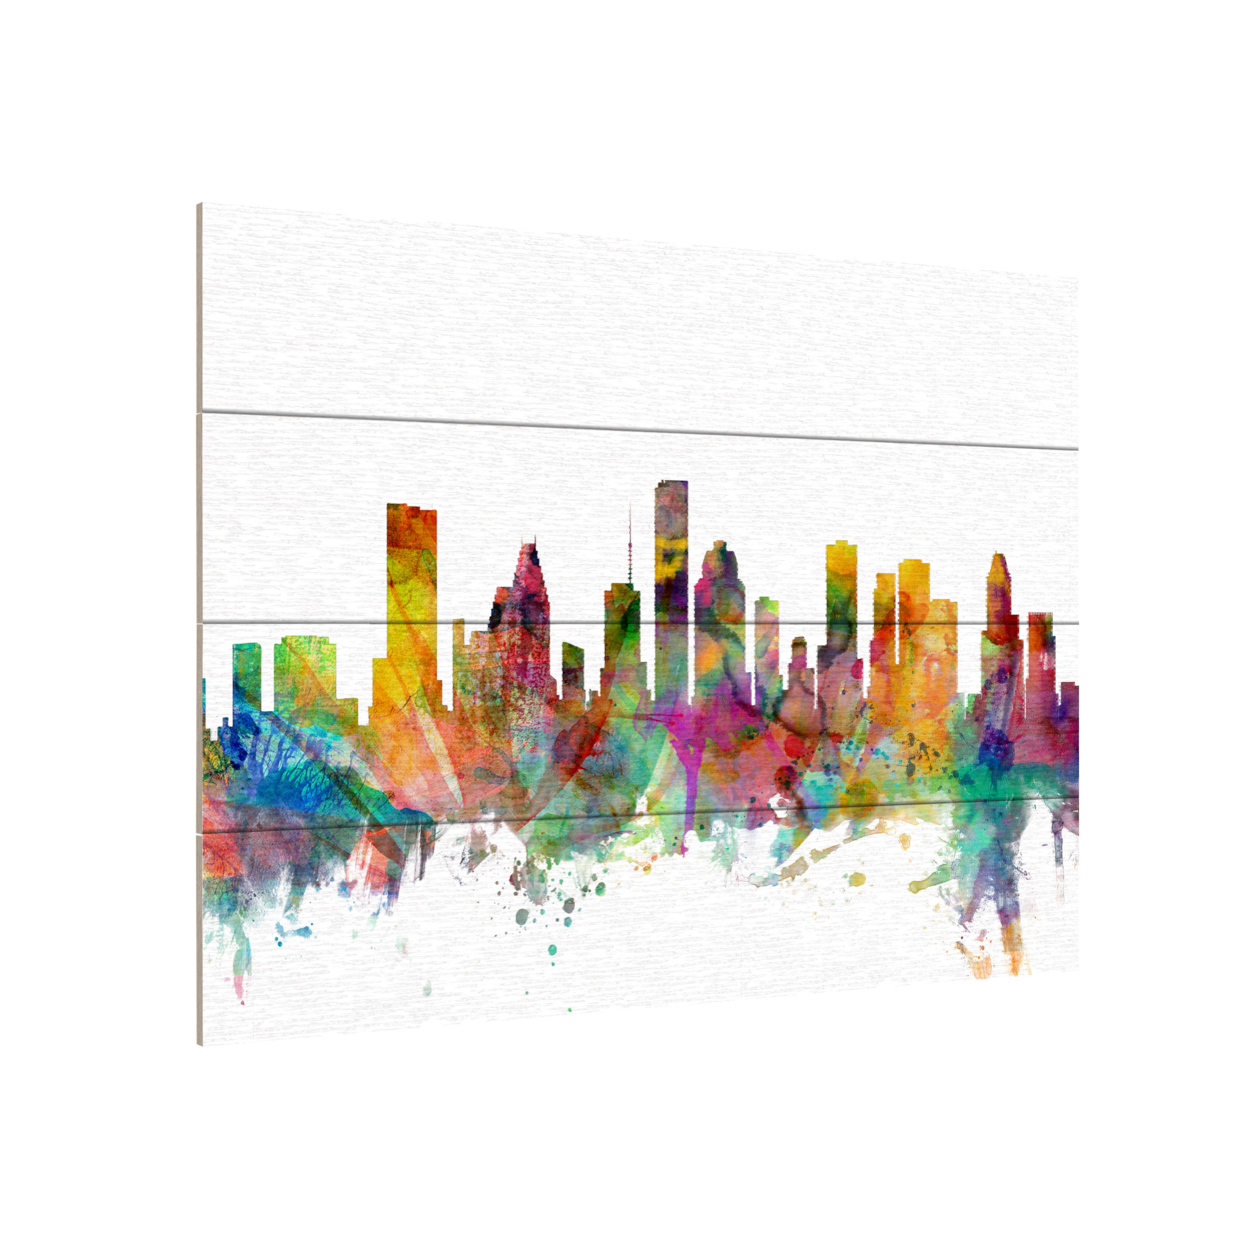 Wall Art 12 X 16 Inches Titled Houston Texas Skyline Ready To Hang Printed On Wooden Planks